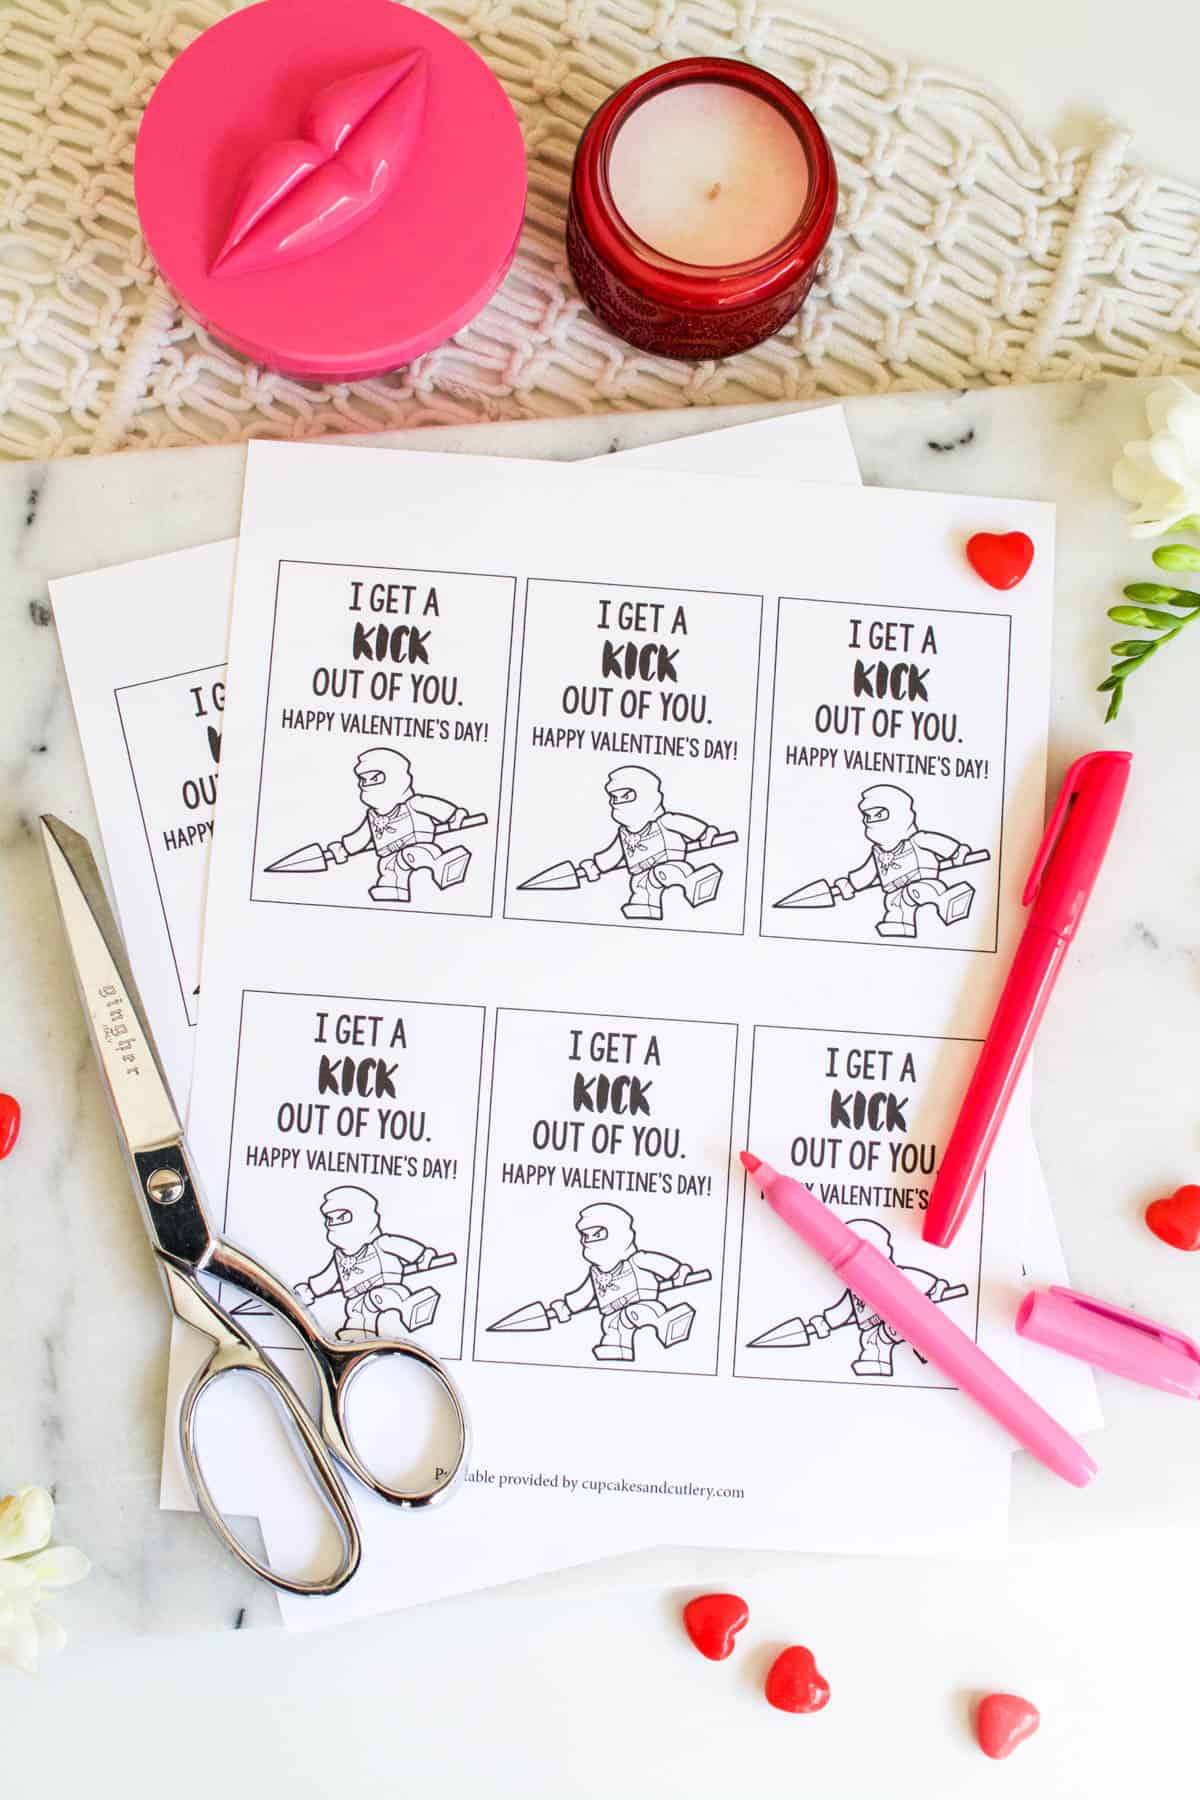 Sheet of printed Valentine's cards with a Lego Ninjago character on them.